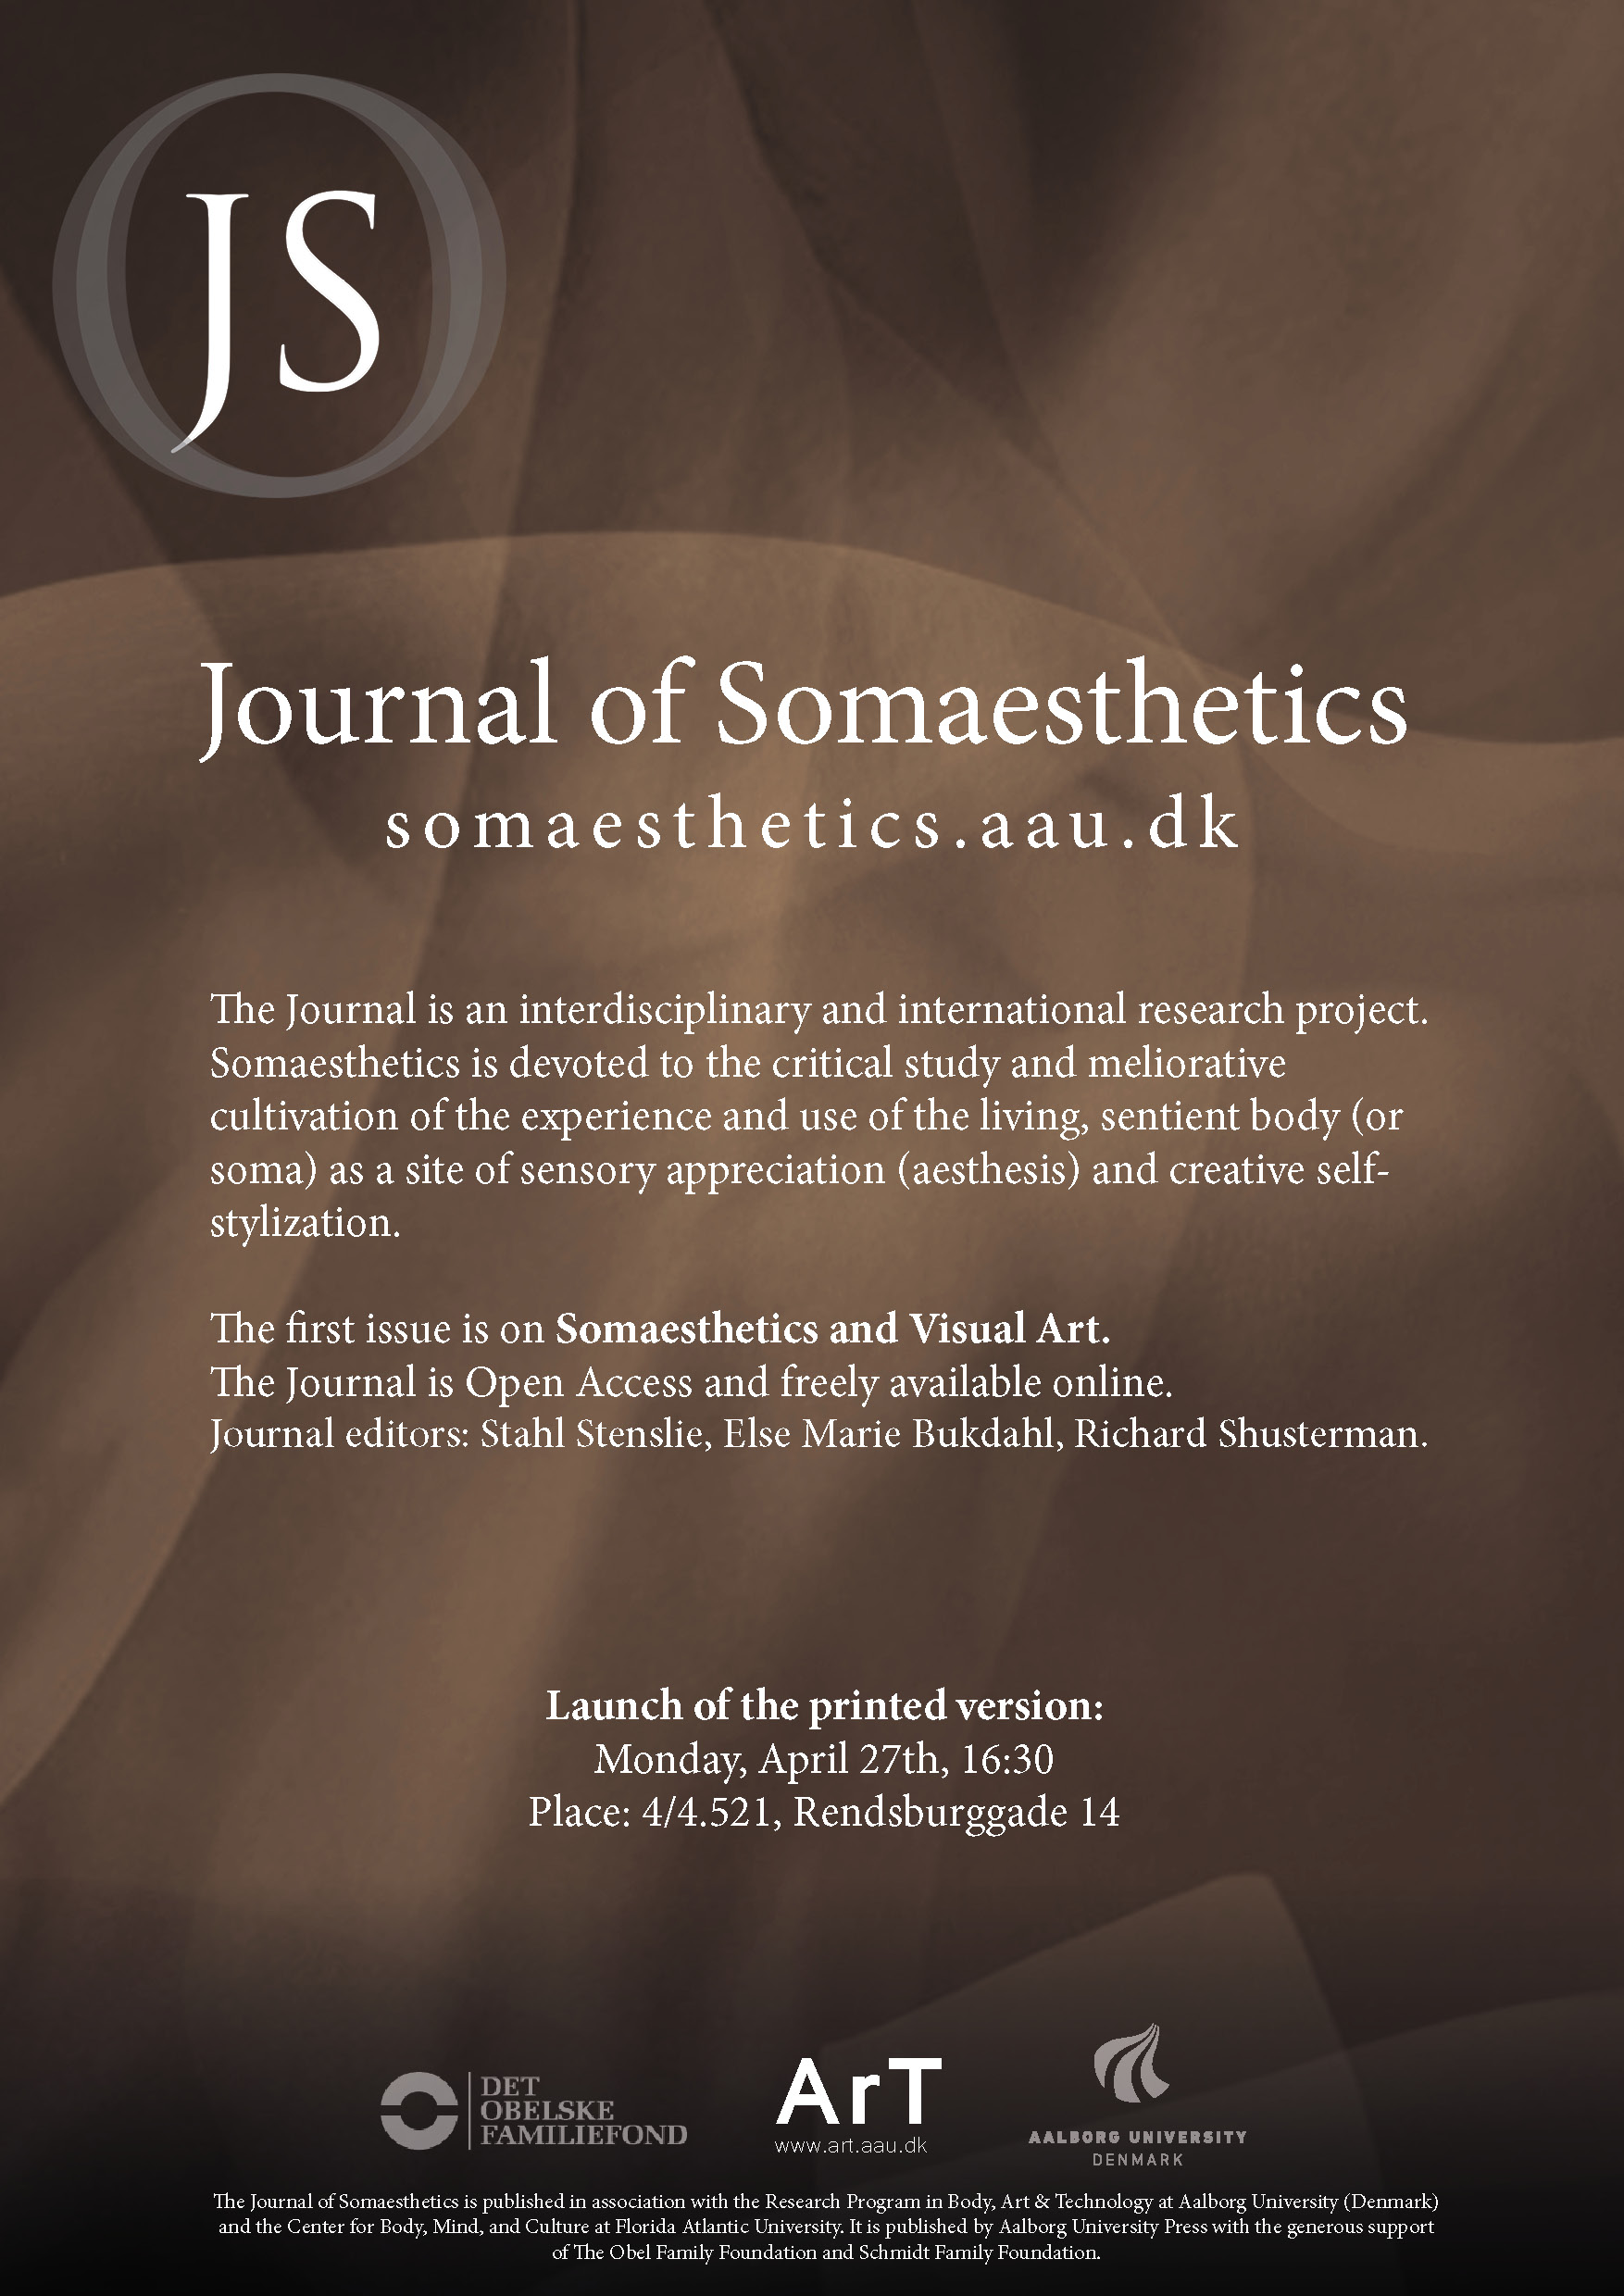 Journal of Somaesthetics: Launch of the printed version